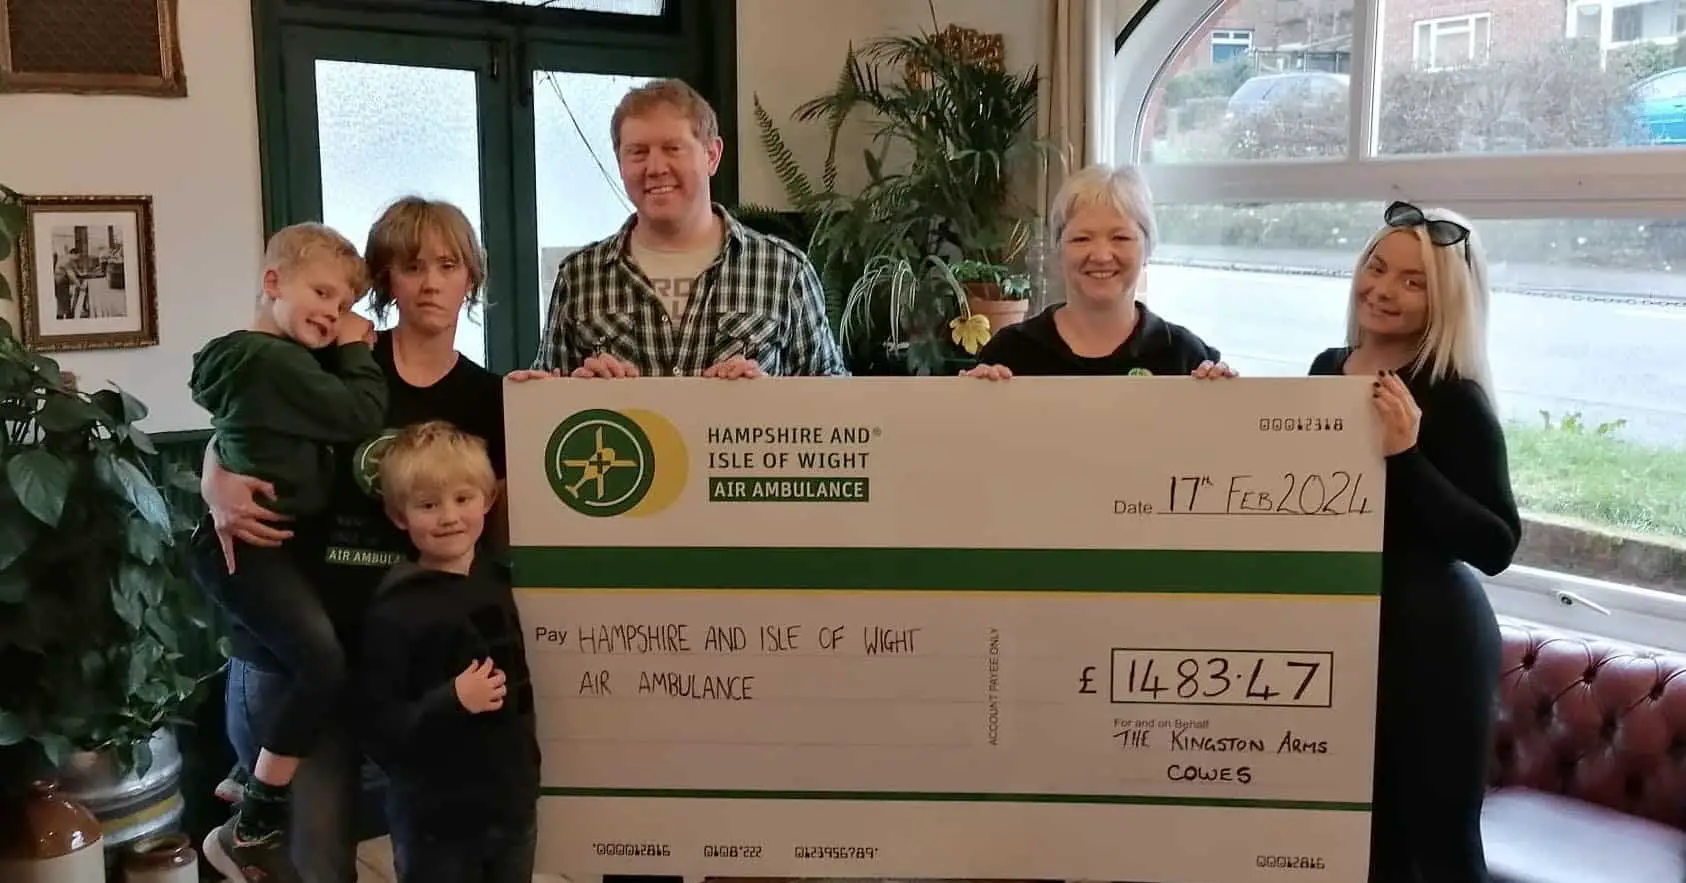 Chris and Gilly with the kids and their giant cheque being presented to Air Ambulance representatives